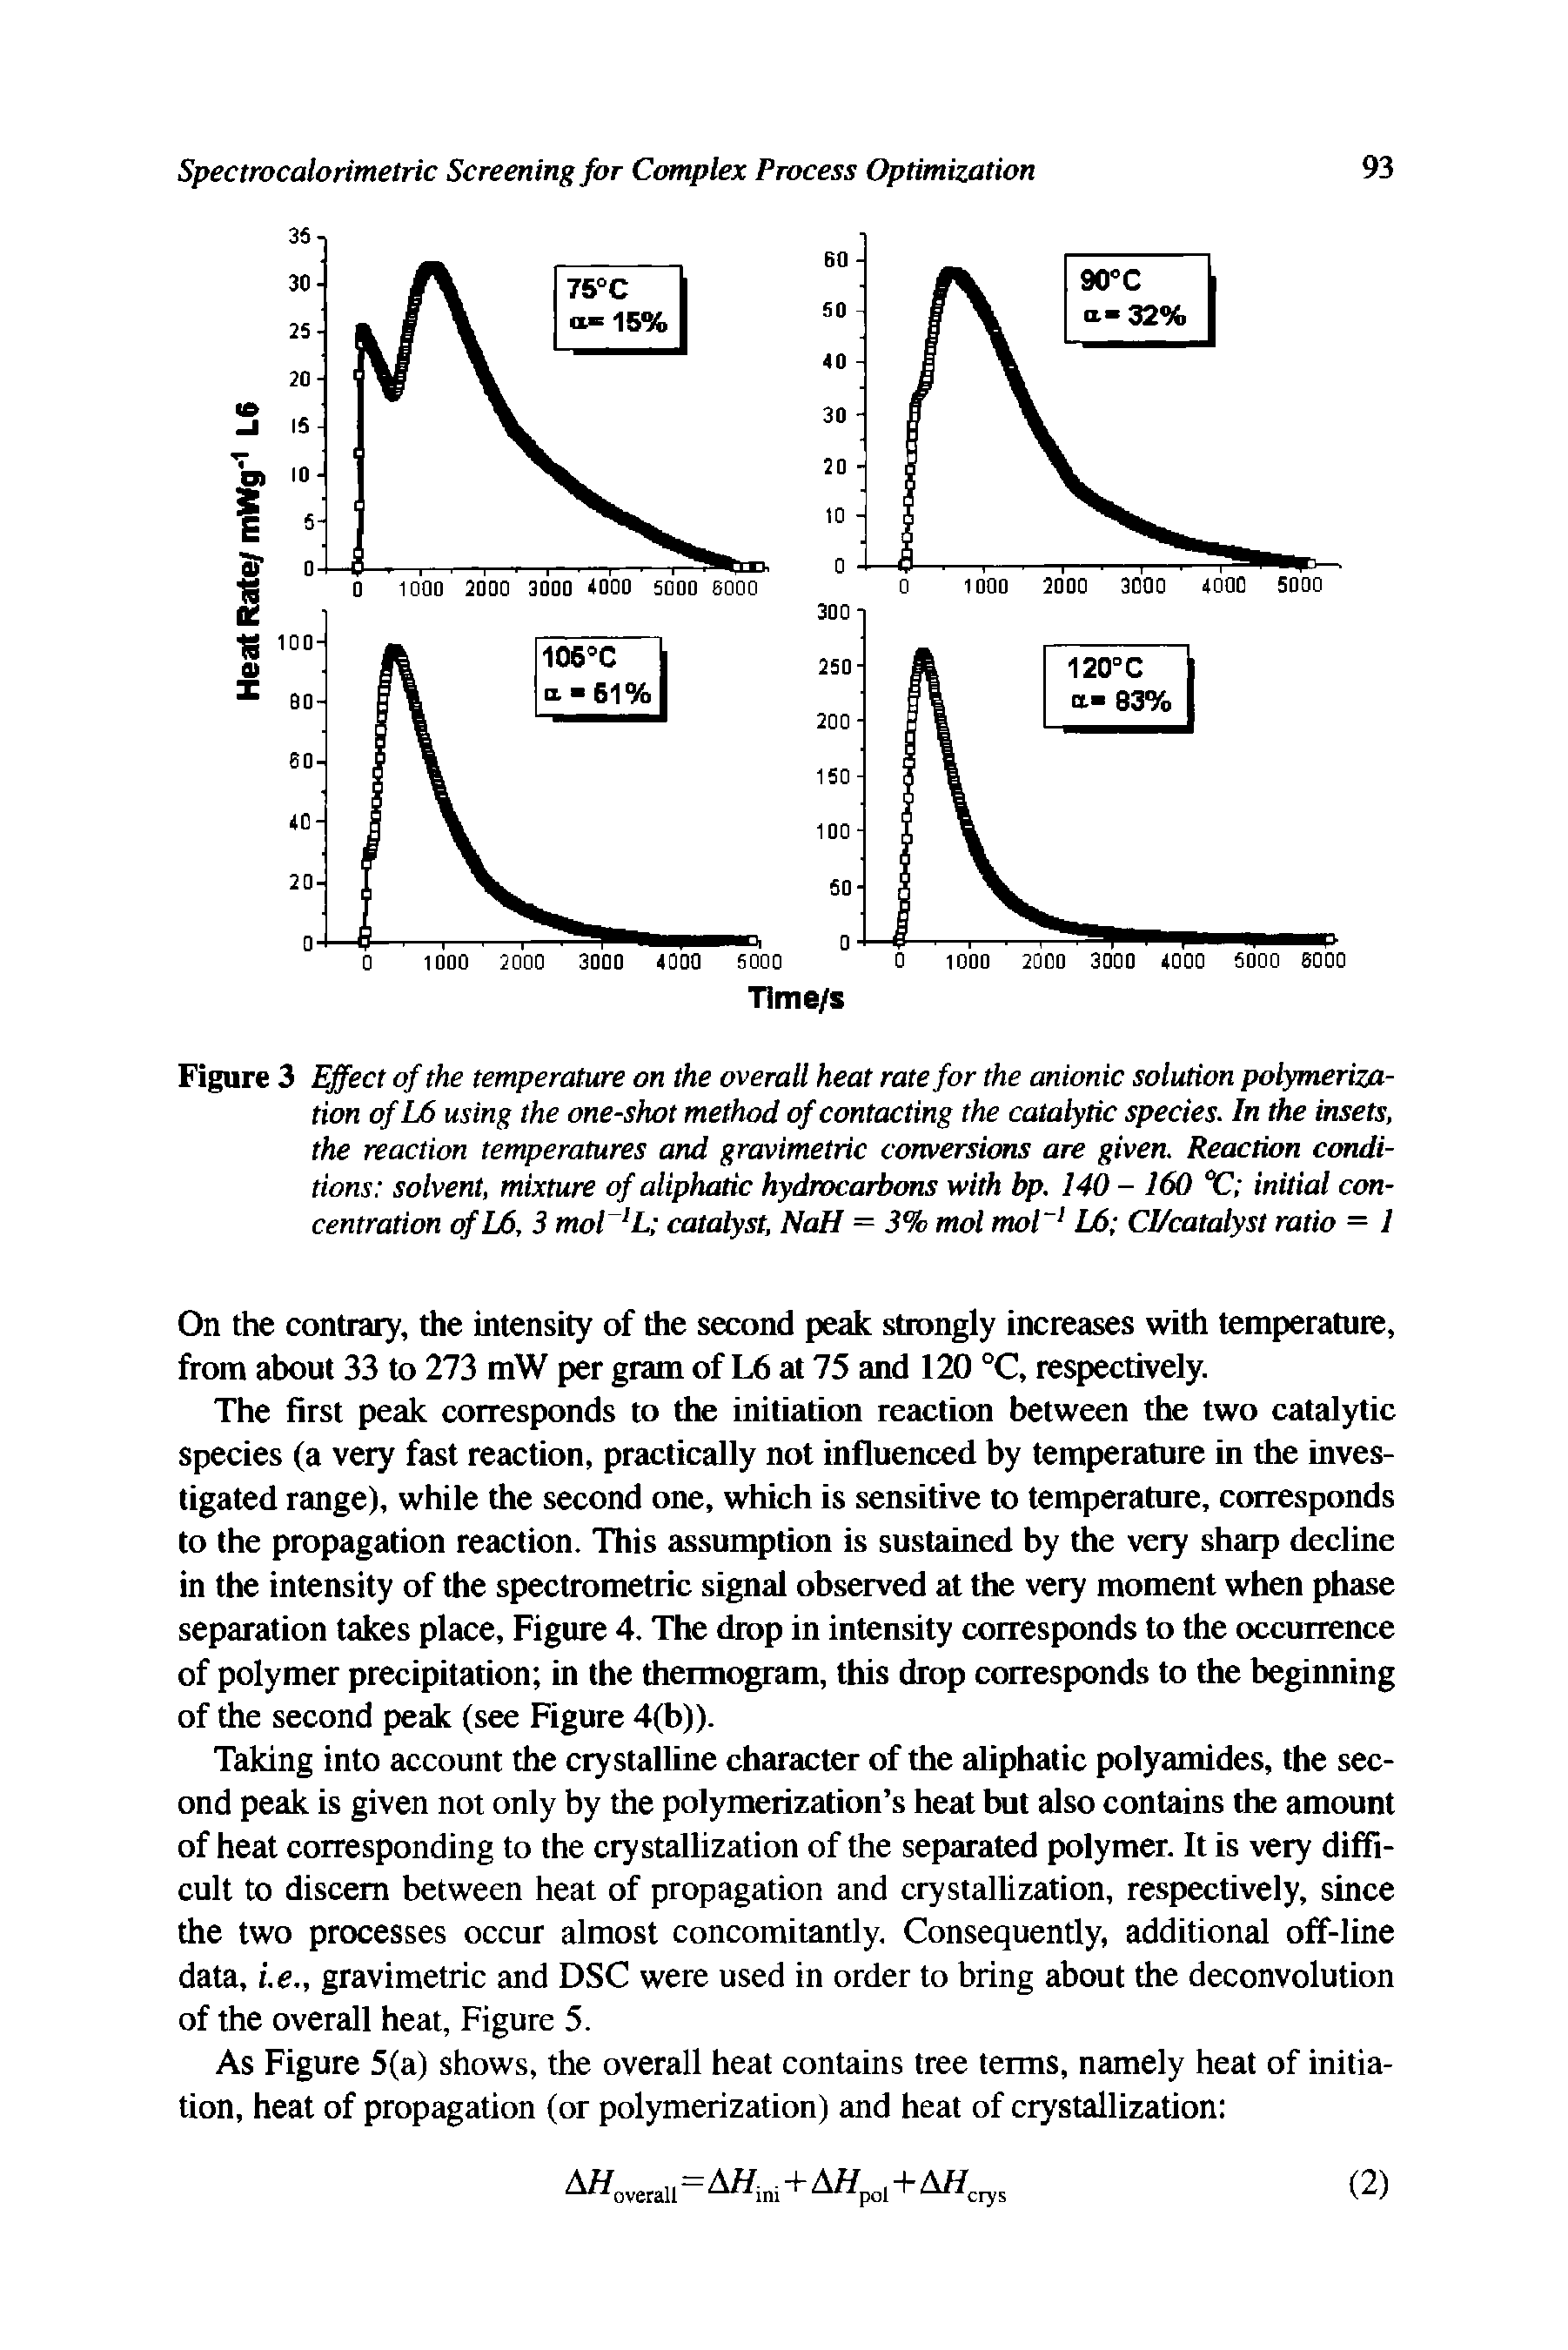 Figure 3 Effect of the temperature on the overall heat rate for the anionic solution polymerization ofL6 using the one-shot method of contacting the catalytic species. In the insets, the reaction temperatures and gravimetric conversions are given. Reaction conditions solvent, mixture of aliphatic hydrocarbons with bp. 140 - 160 °C initial concentration ofL6, 3 mol L catalyst, NaH = 3% mol mol L6 Cl/catalyst ratio = 1...